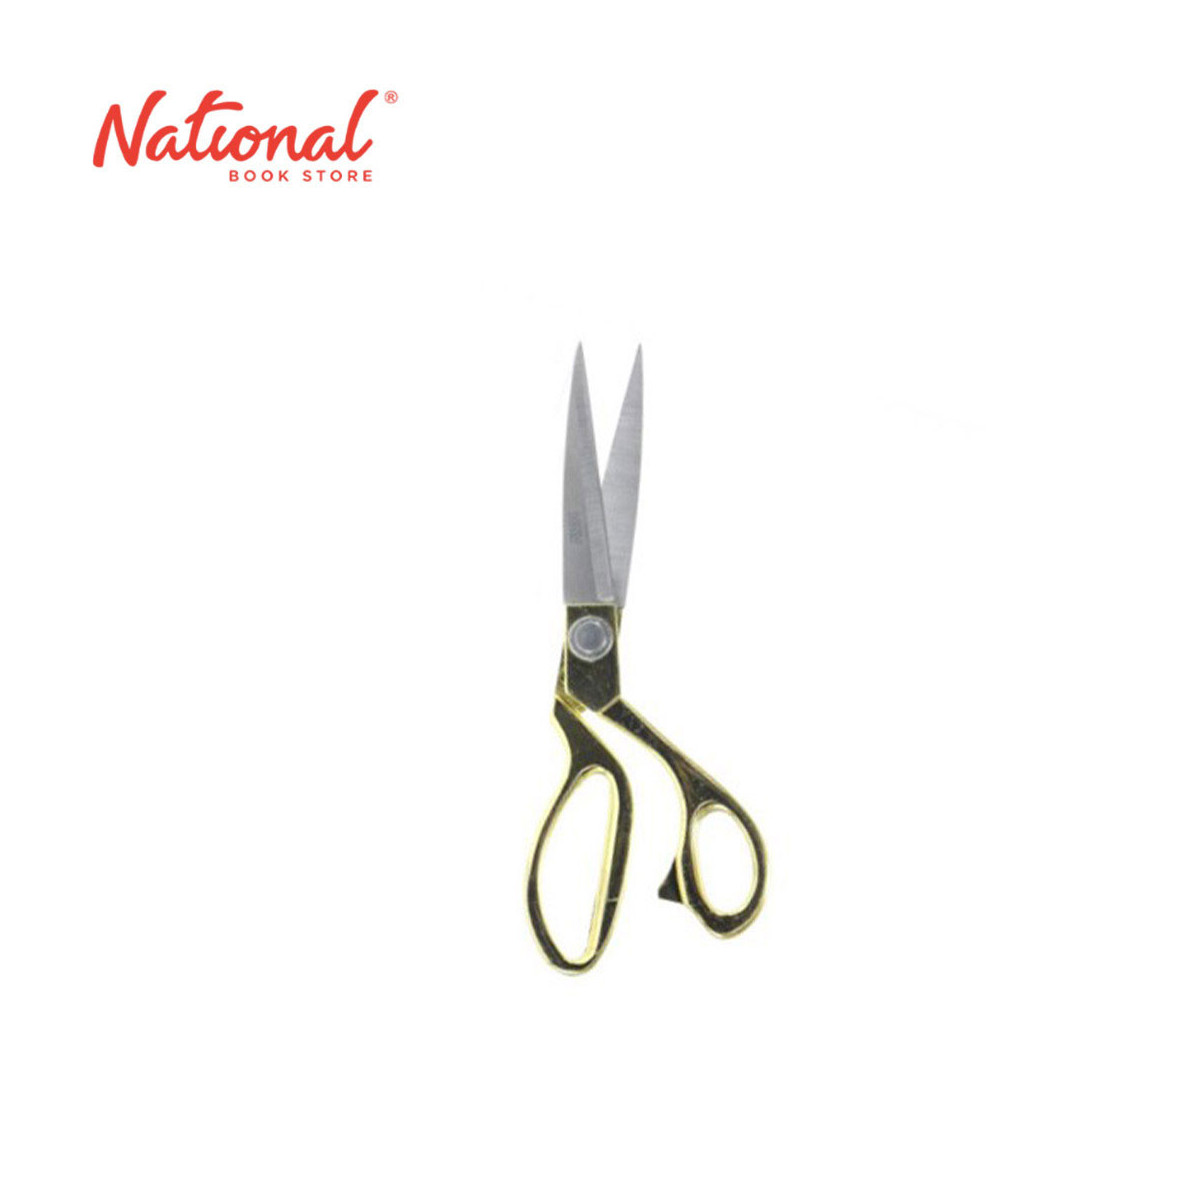 https://www.nationalbookstore.com/127244-thickbox_default/hbw-multi-purpose-scissors-tailor-stainless-steel-with-golden-handle-y55007-9-inches-school-supplies.jpg